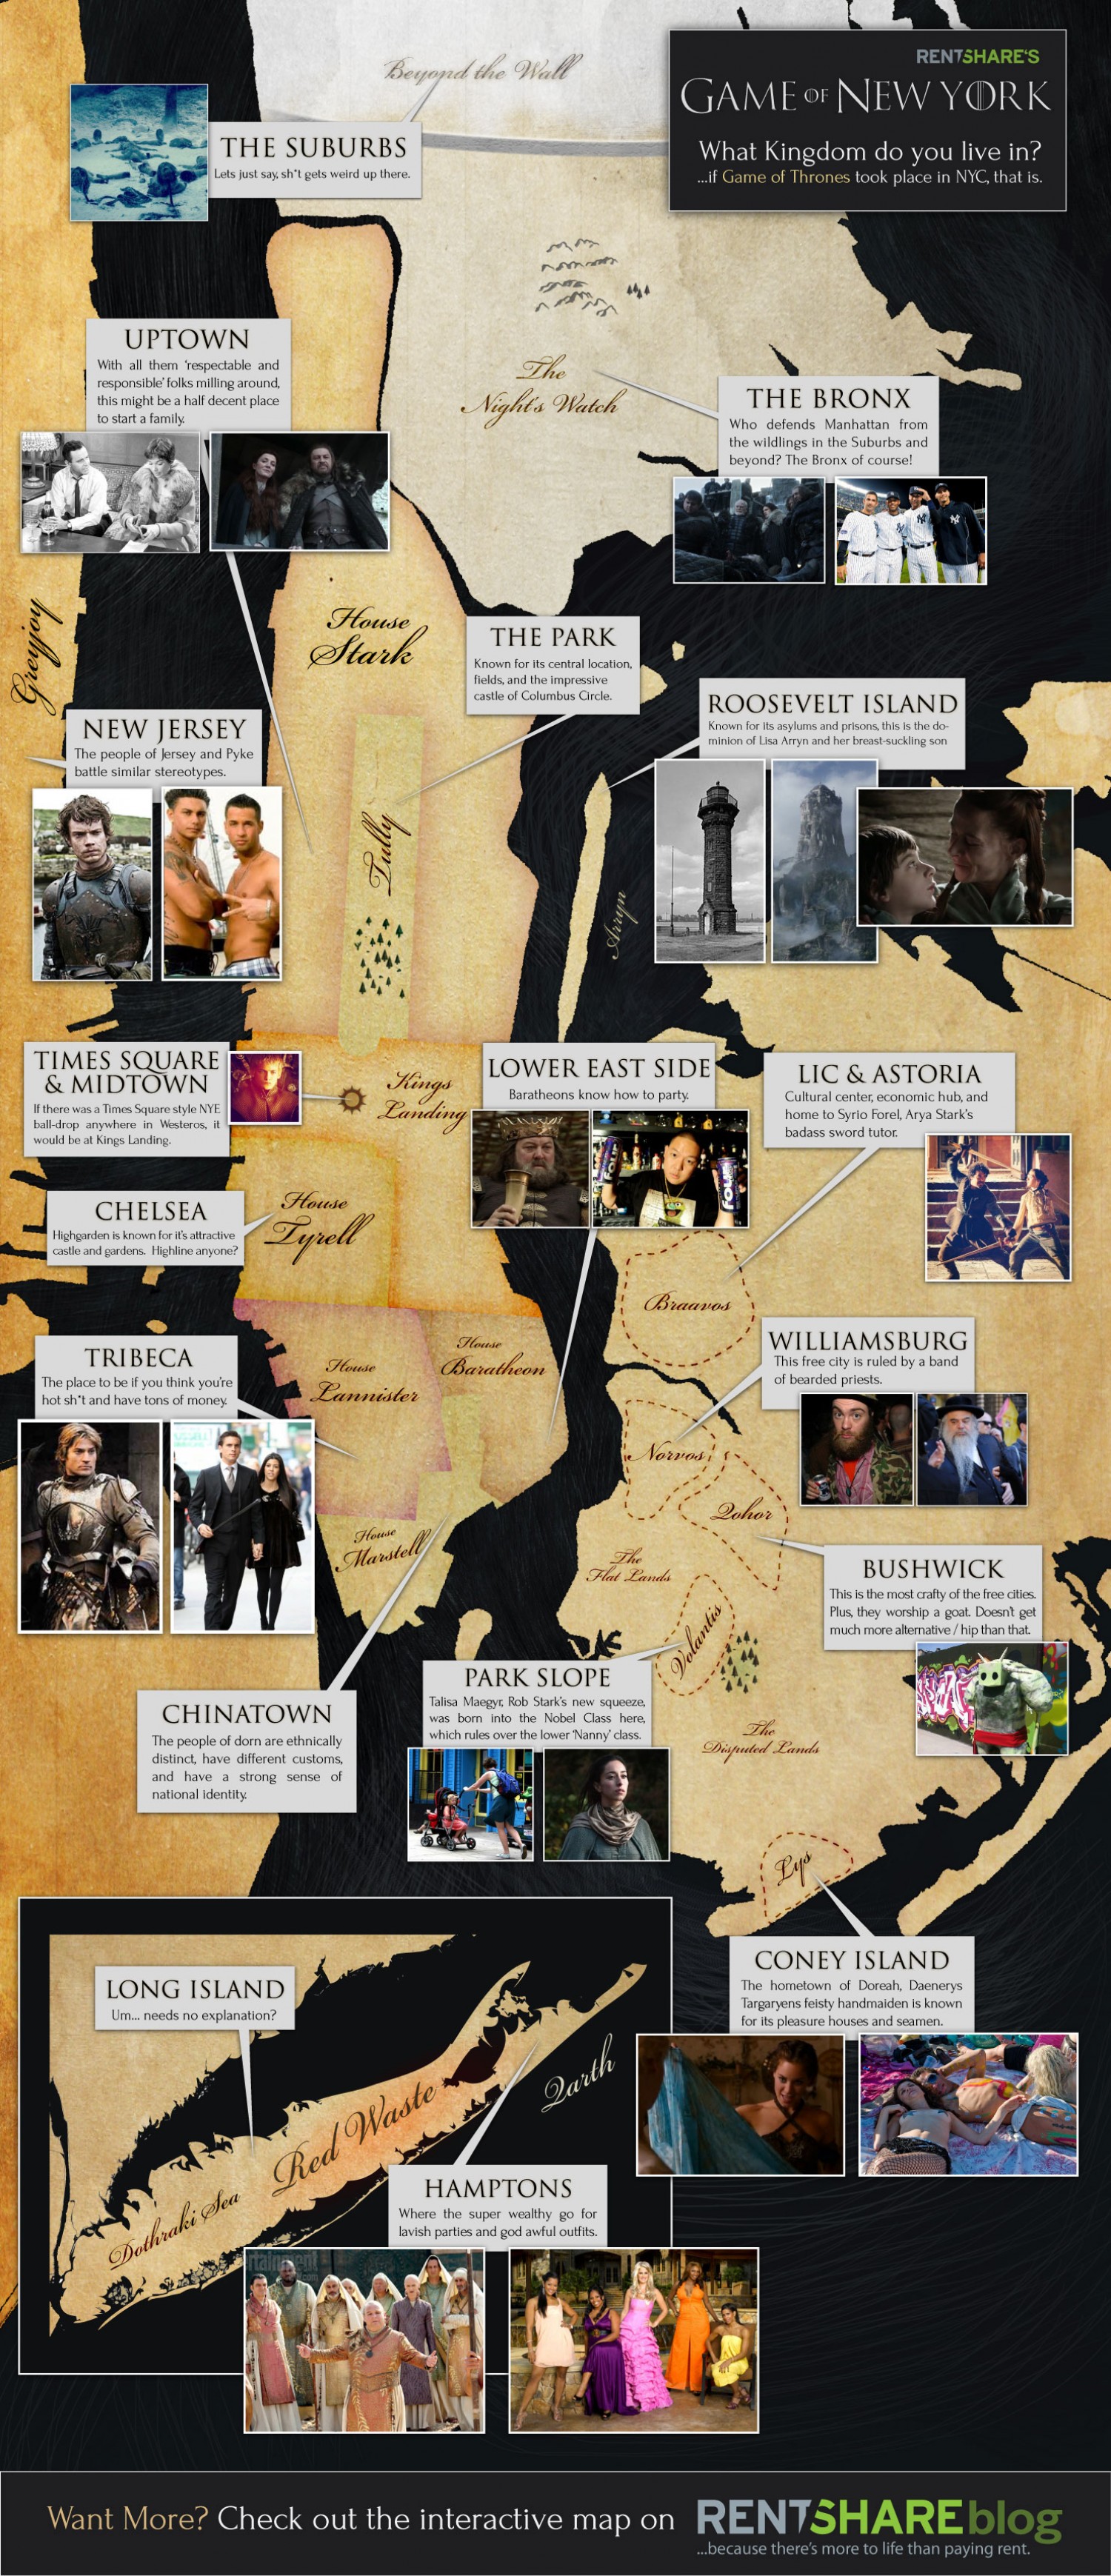 What if Game of Thrones Took Place in NYC?